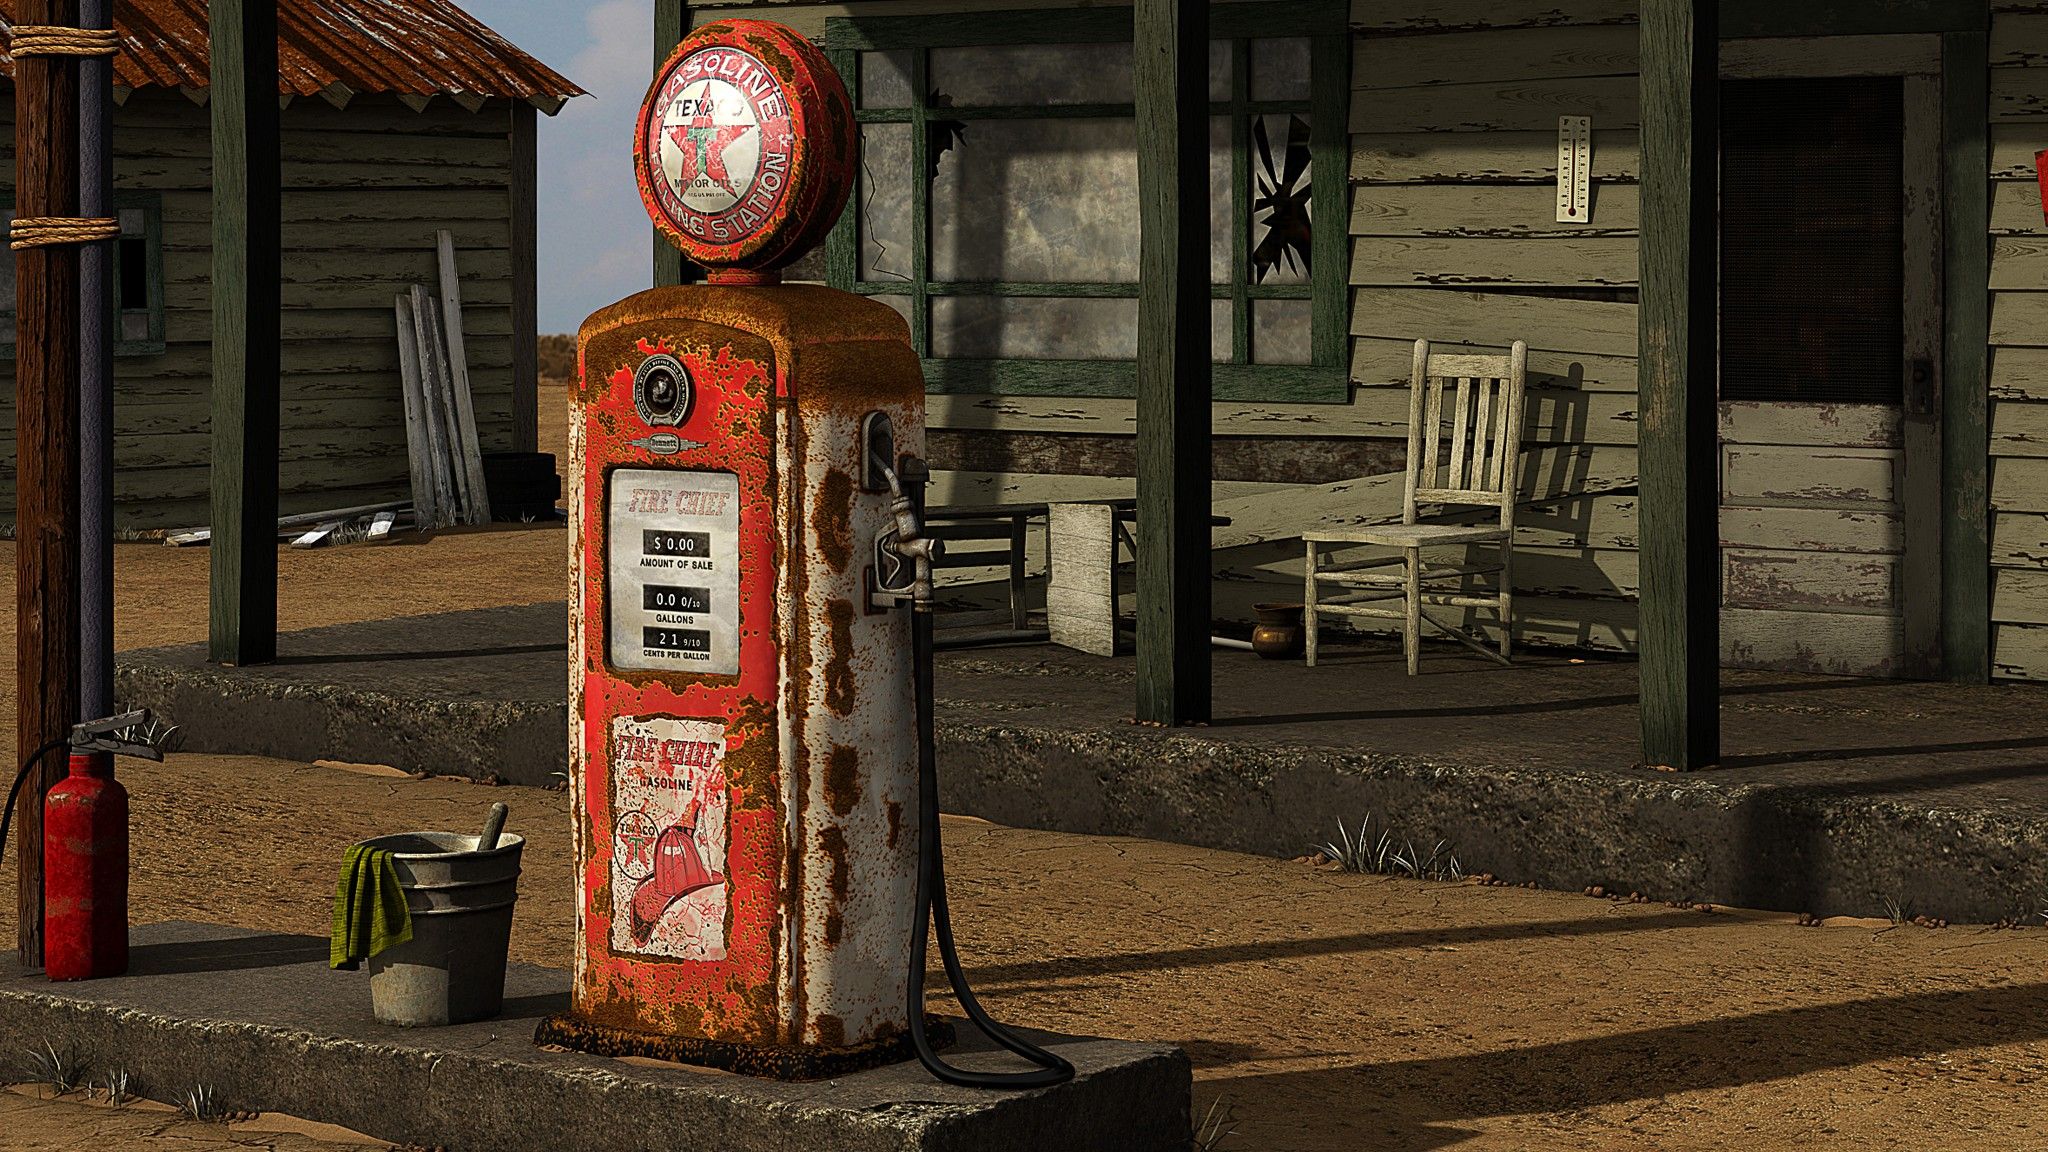 Texaco. Old gas stations, Vintage gas pumps, Old gas pumps